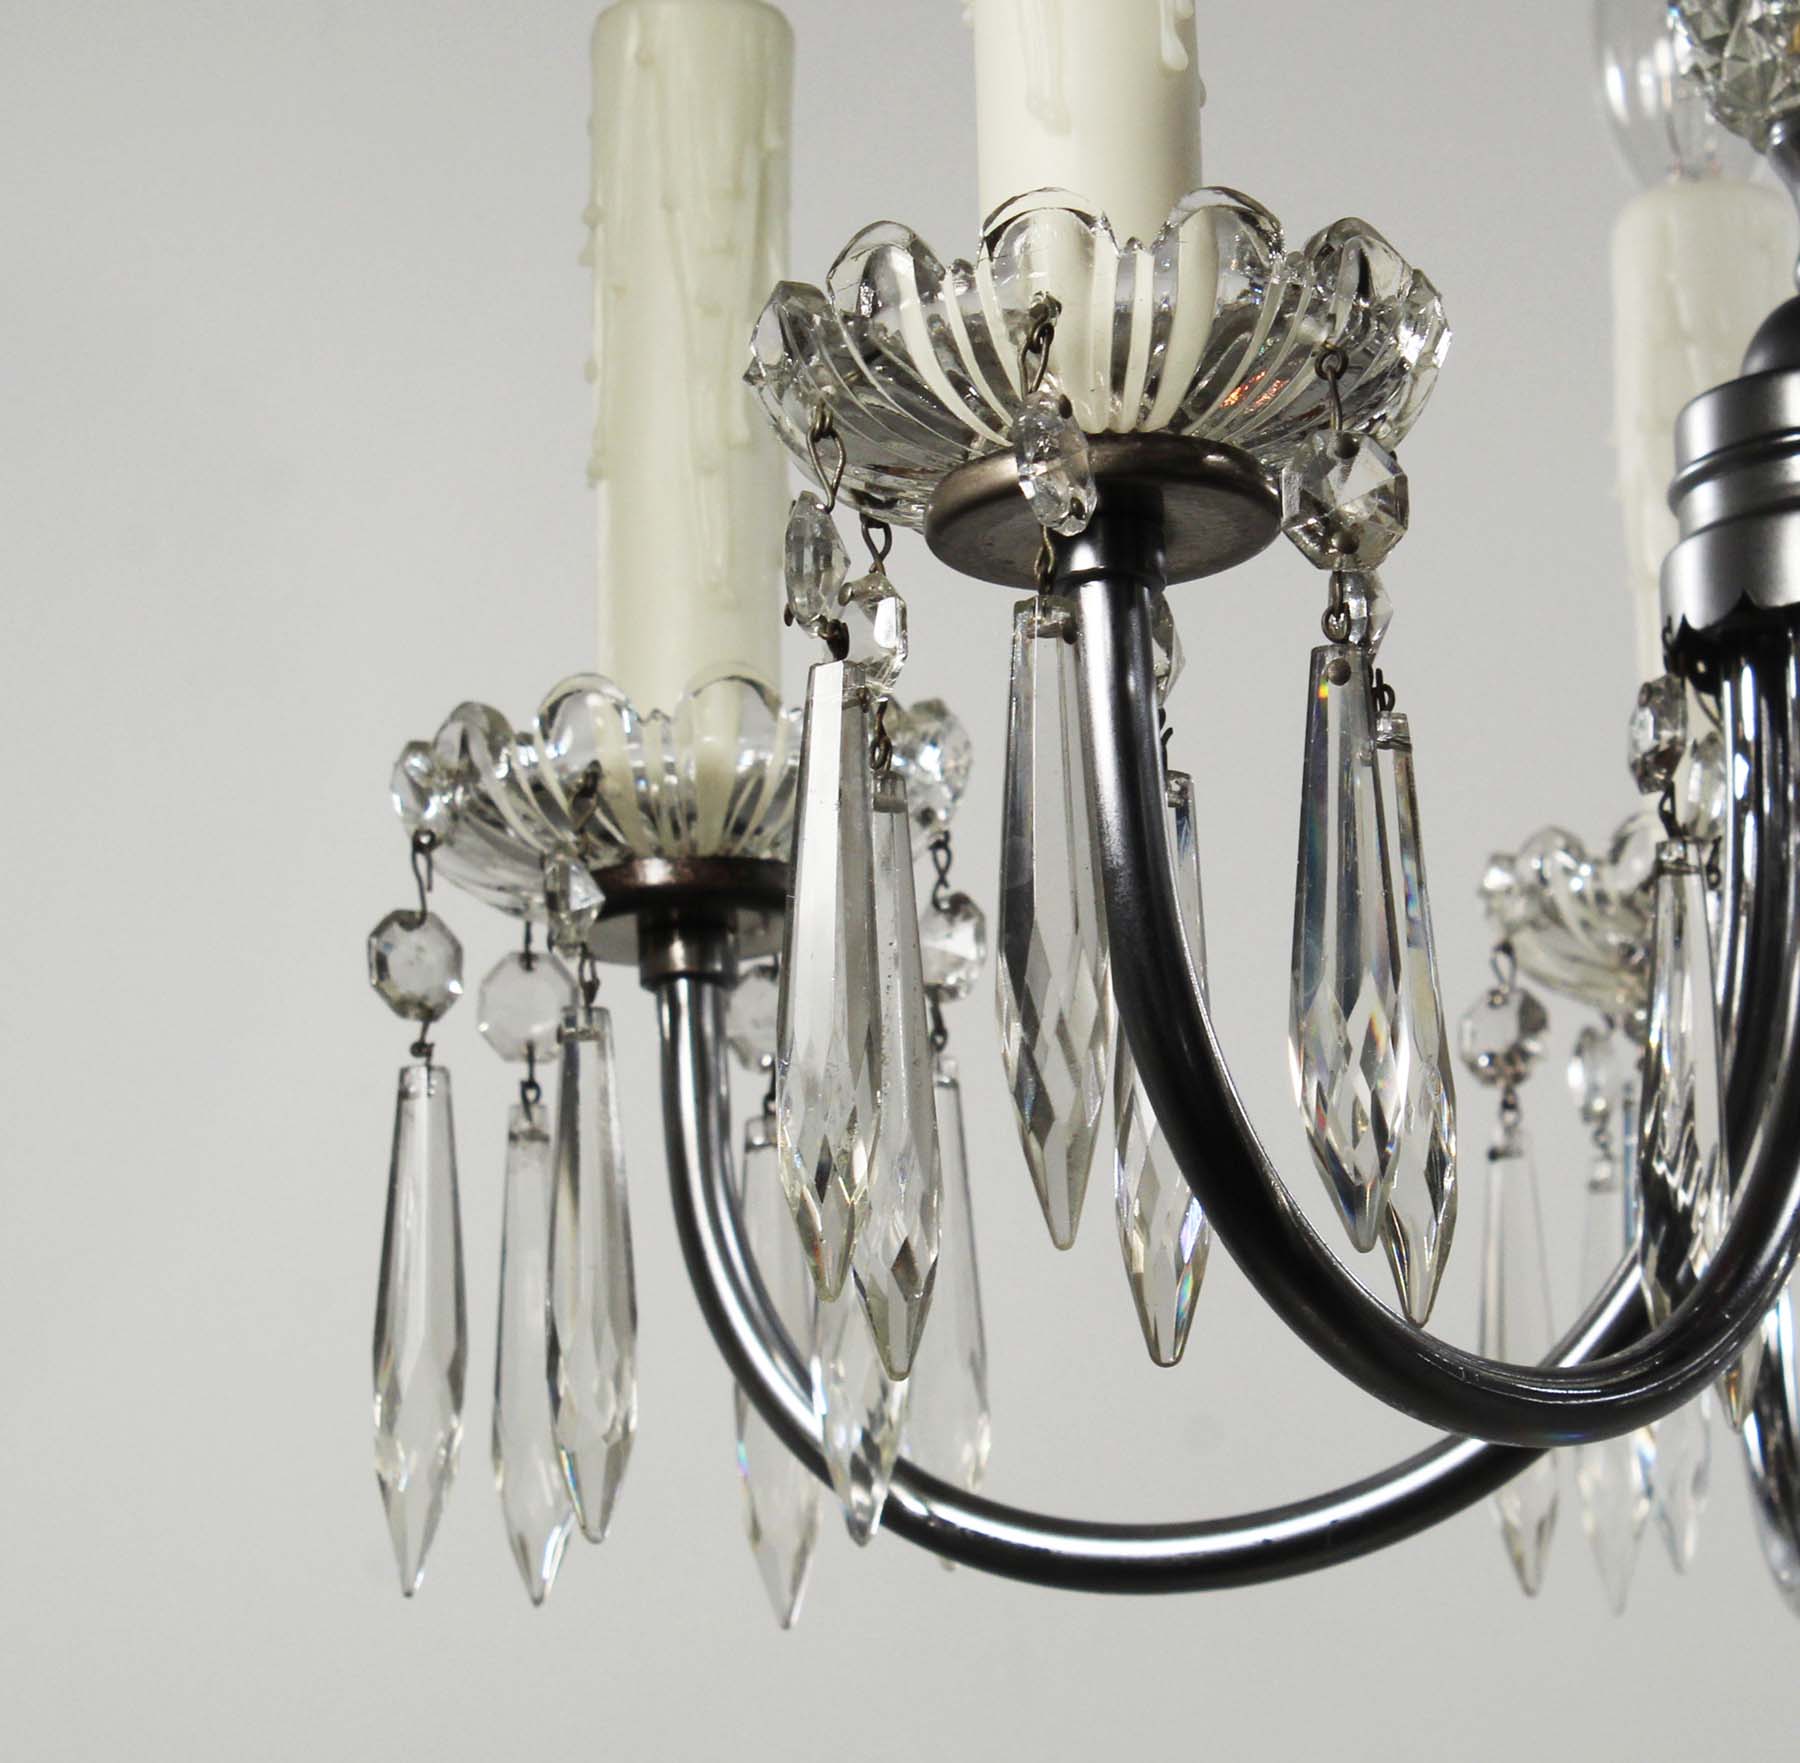 SOLD Antique Five-Light Chandelier with Prisms, Early 1900’s-68766